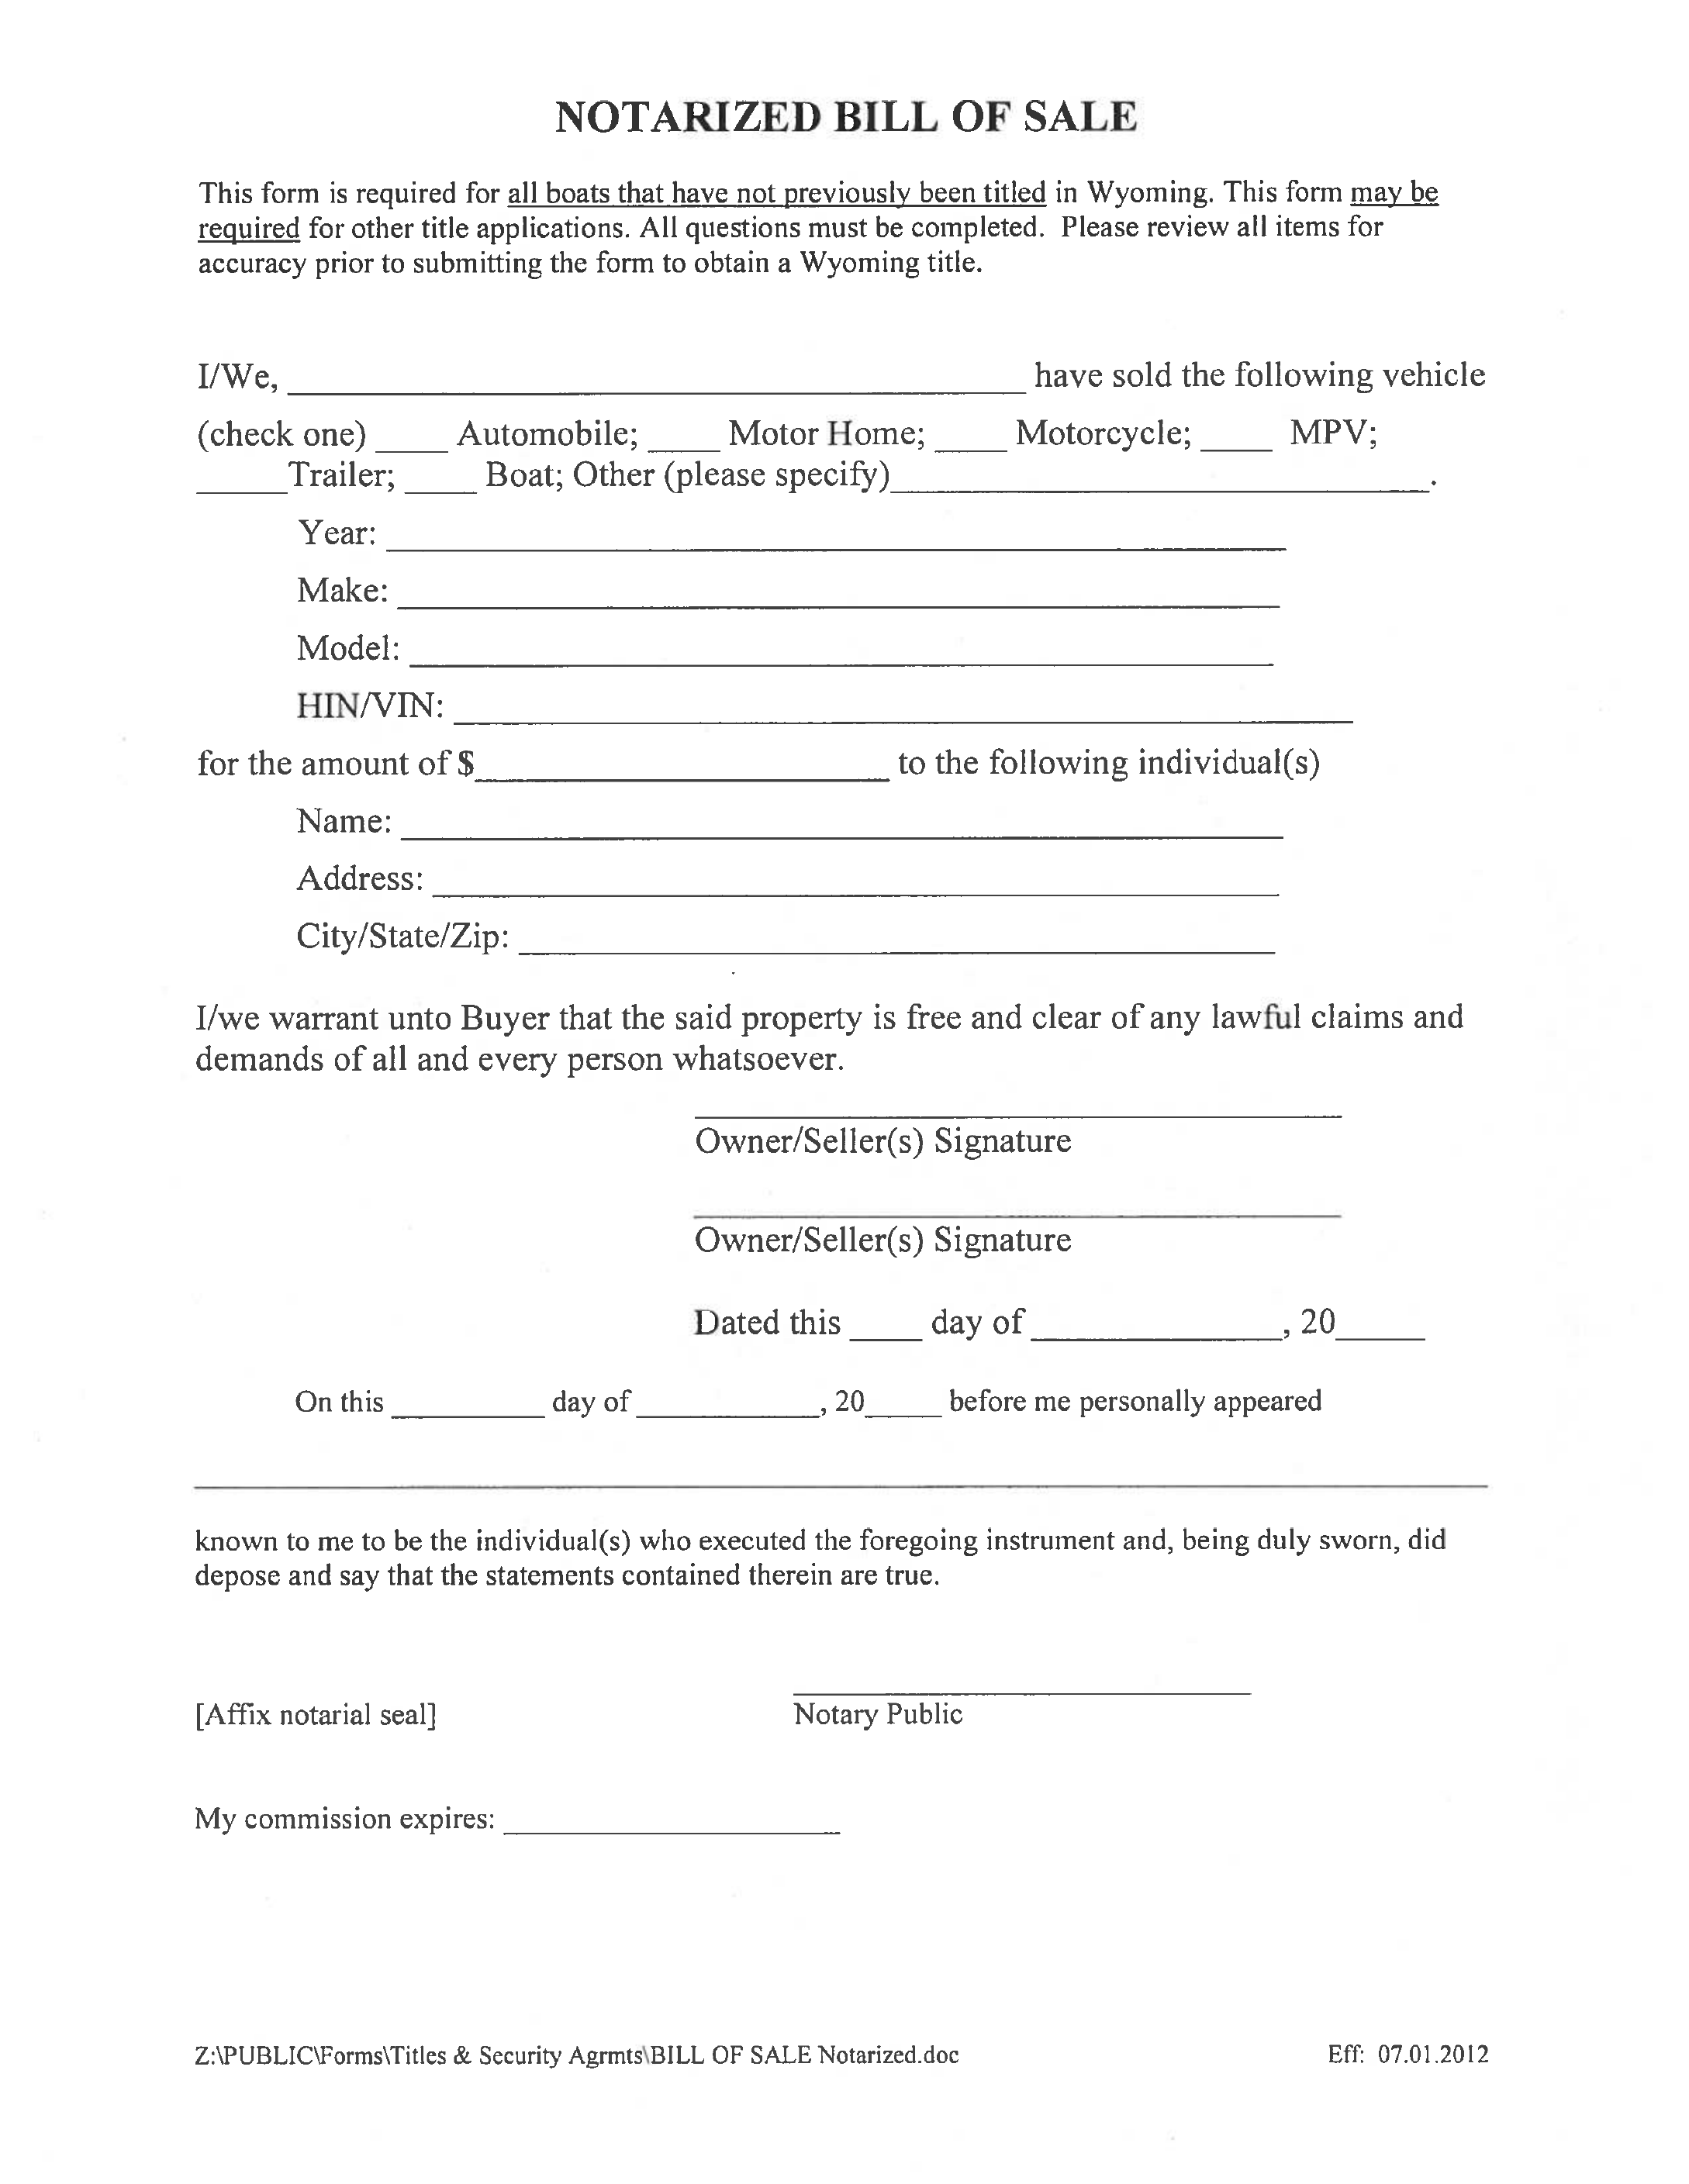 notarized-boat-bill-of-sale-form-wyoming-edit-fill-sign-online